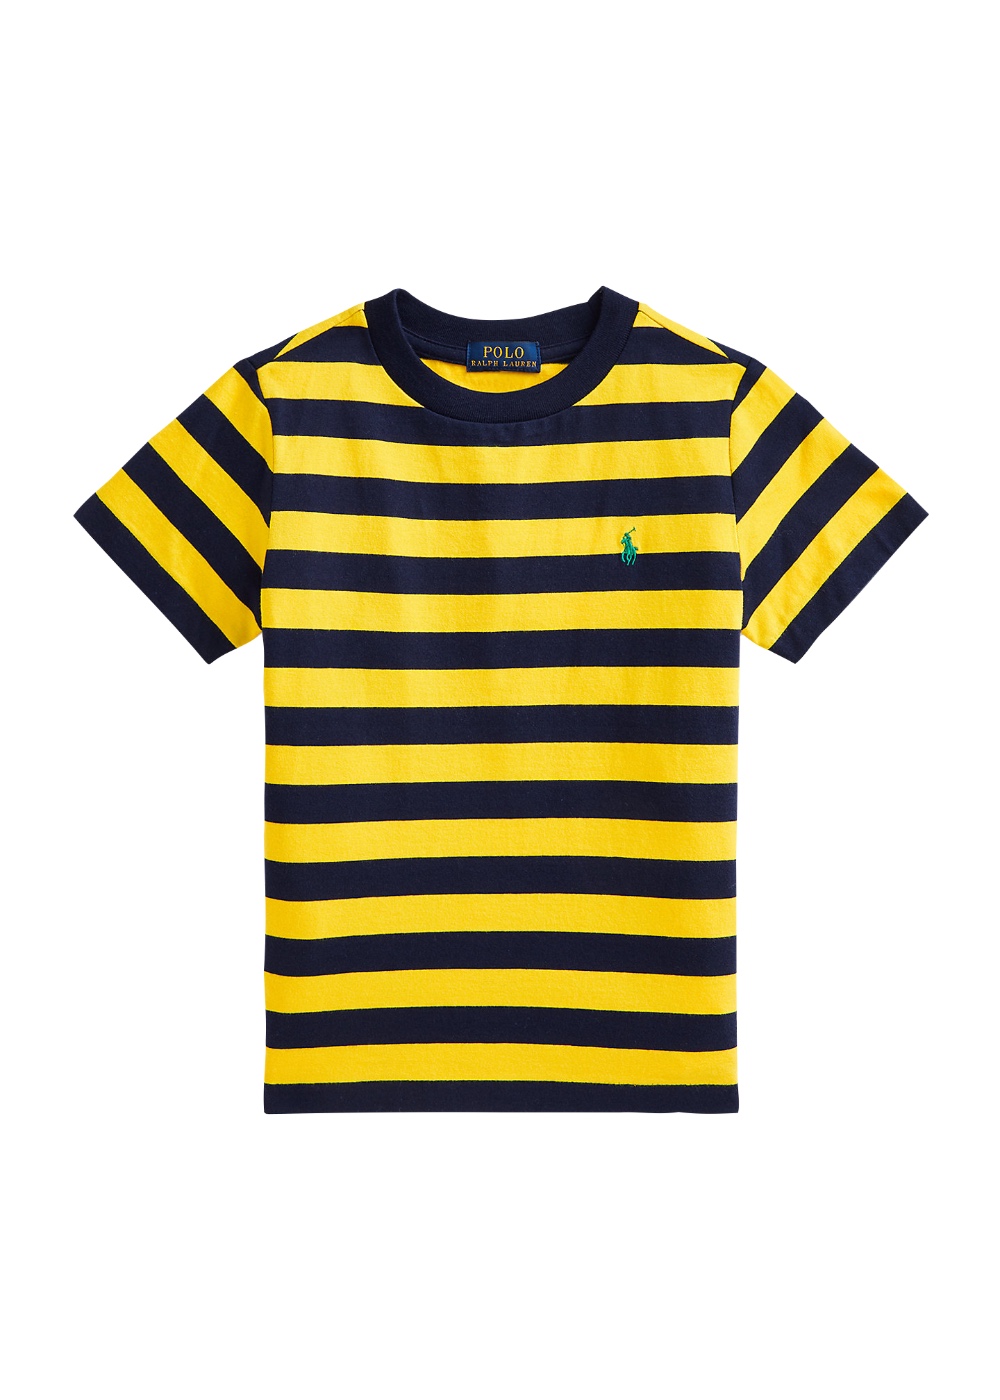 Featured image for “Polo Ralph Lauren T-shirt a righe”